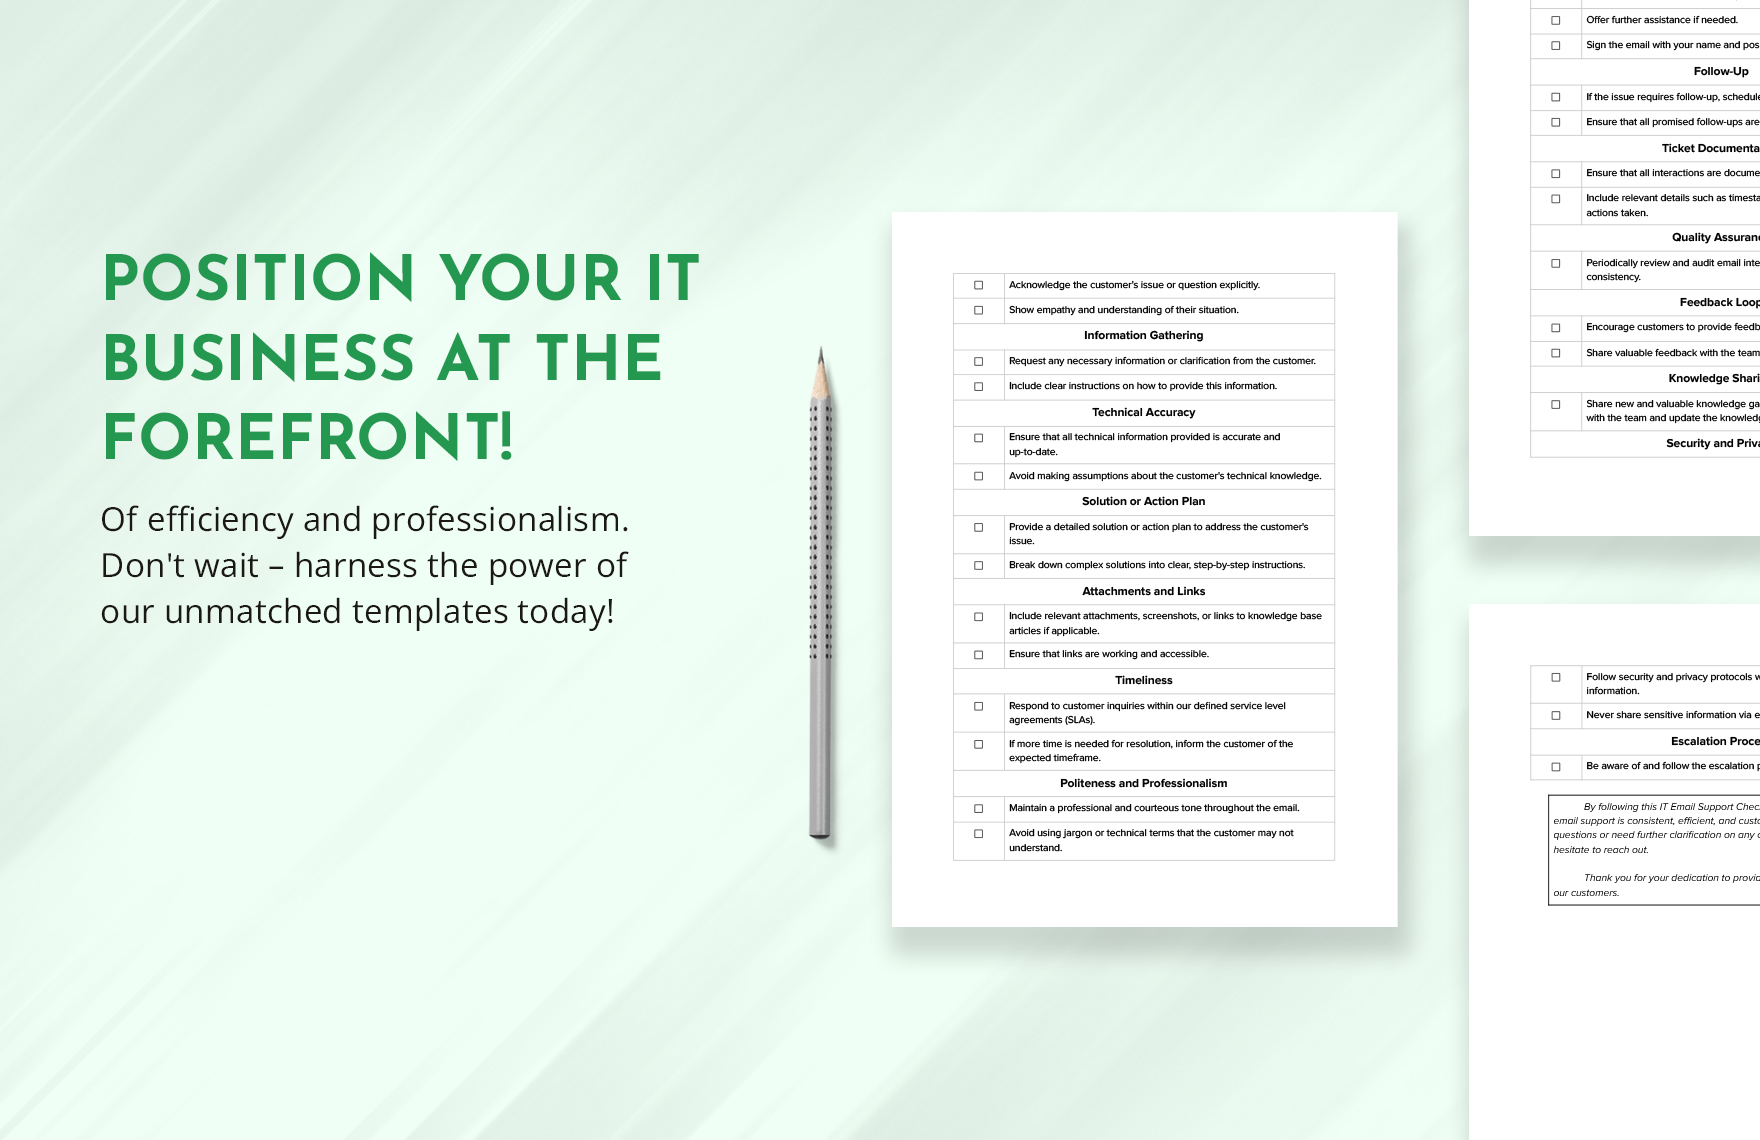 IT Email Support Checklist Template